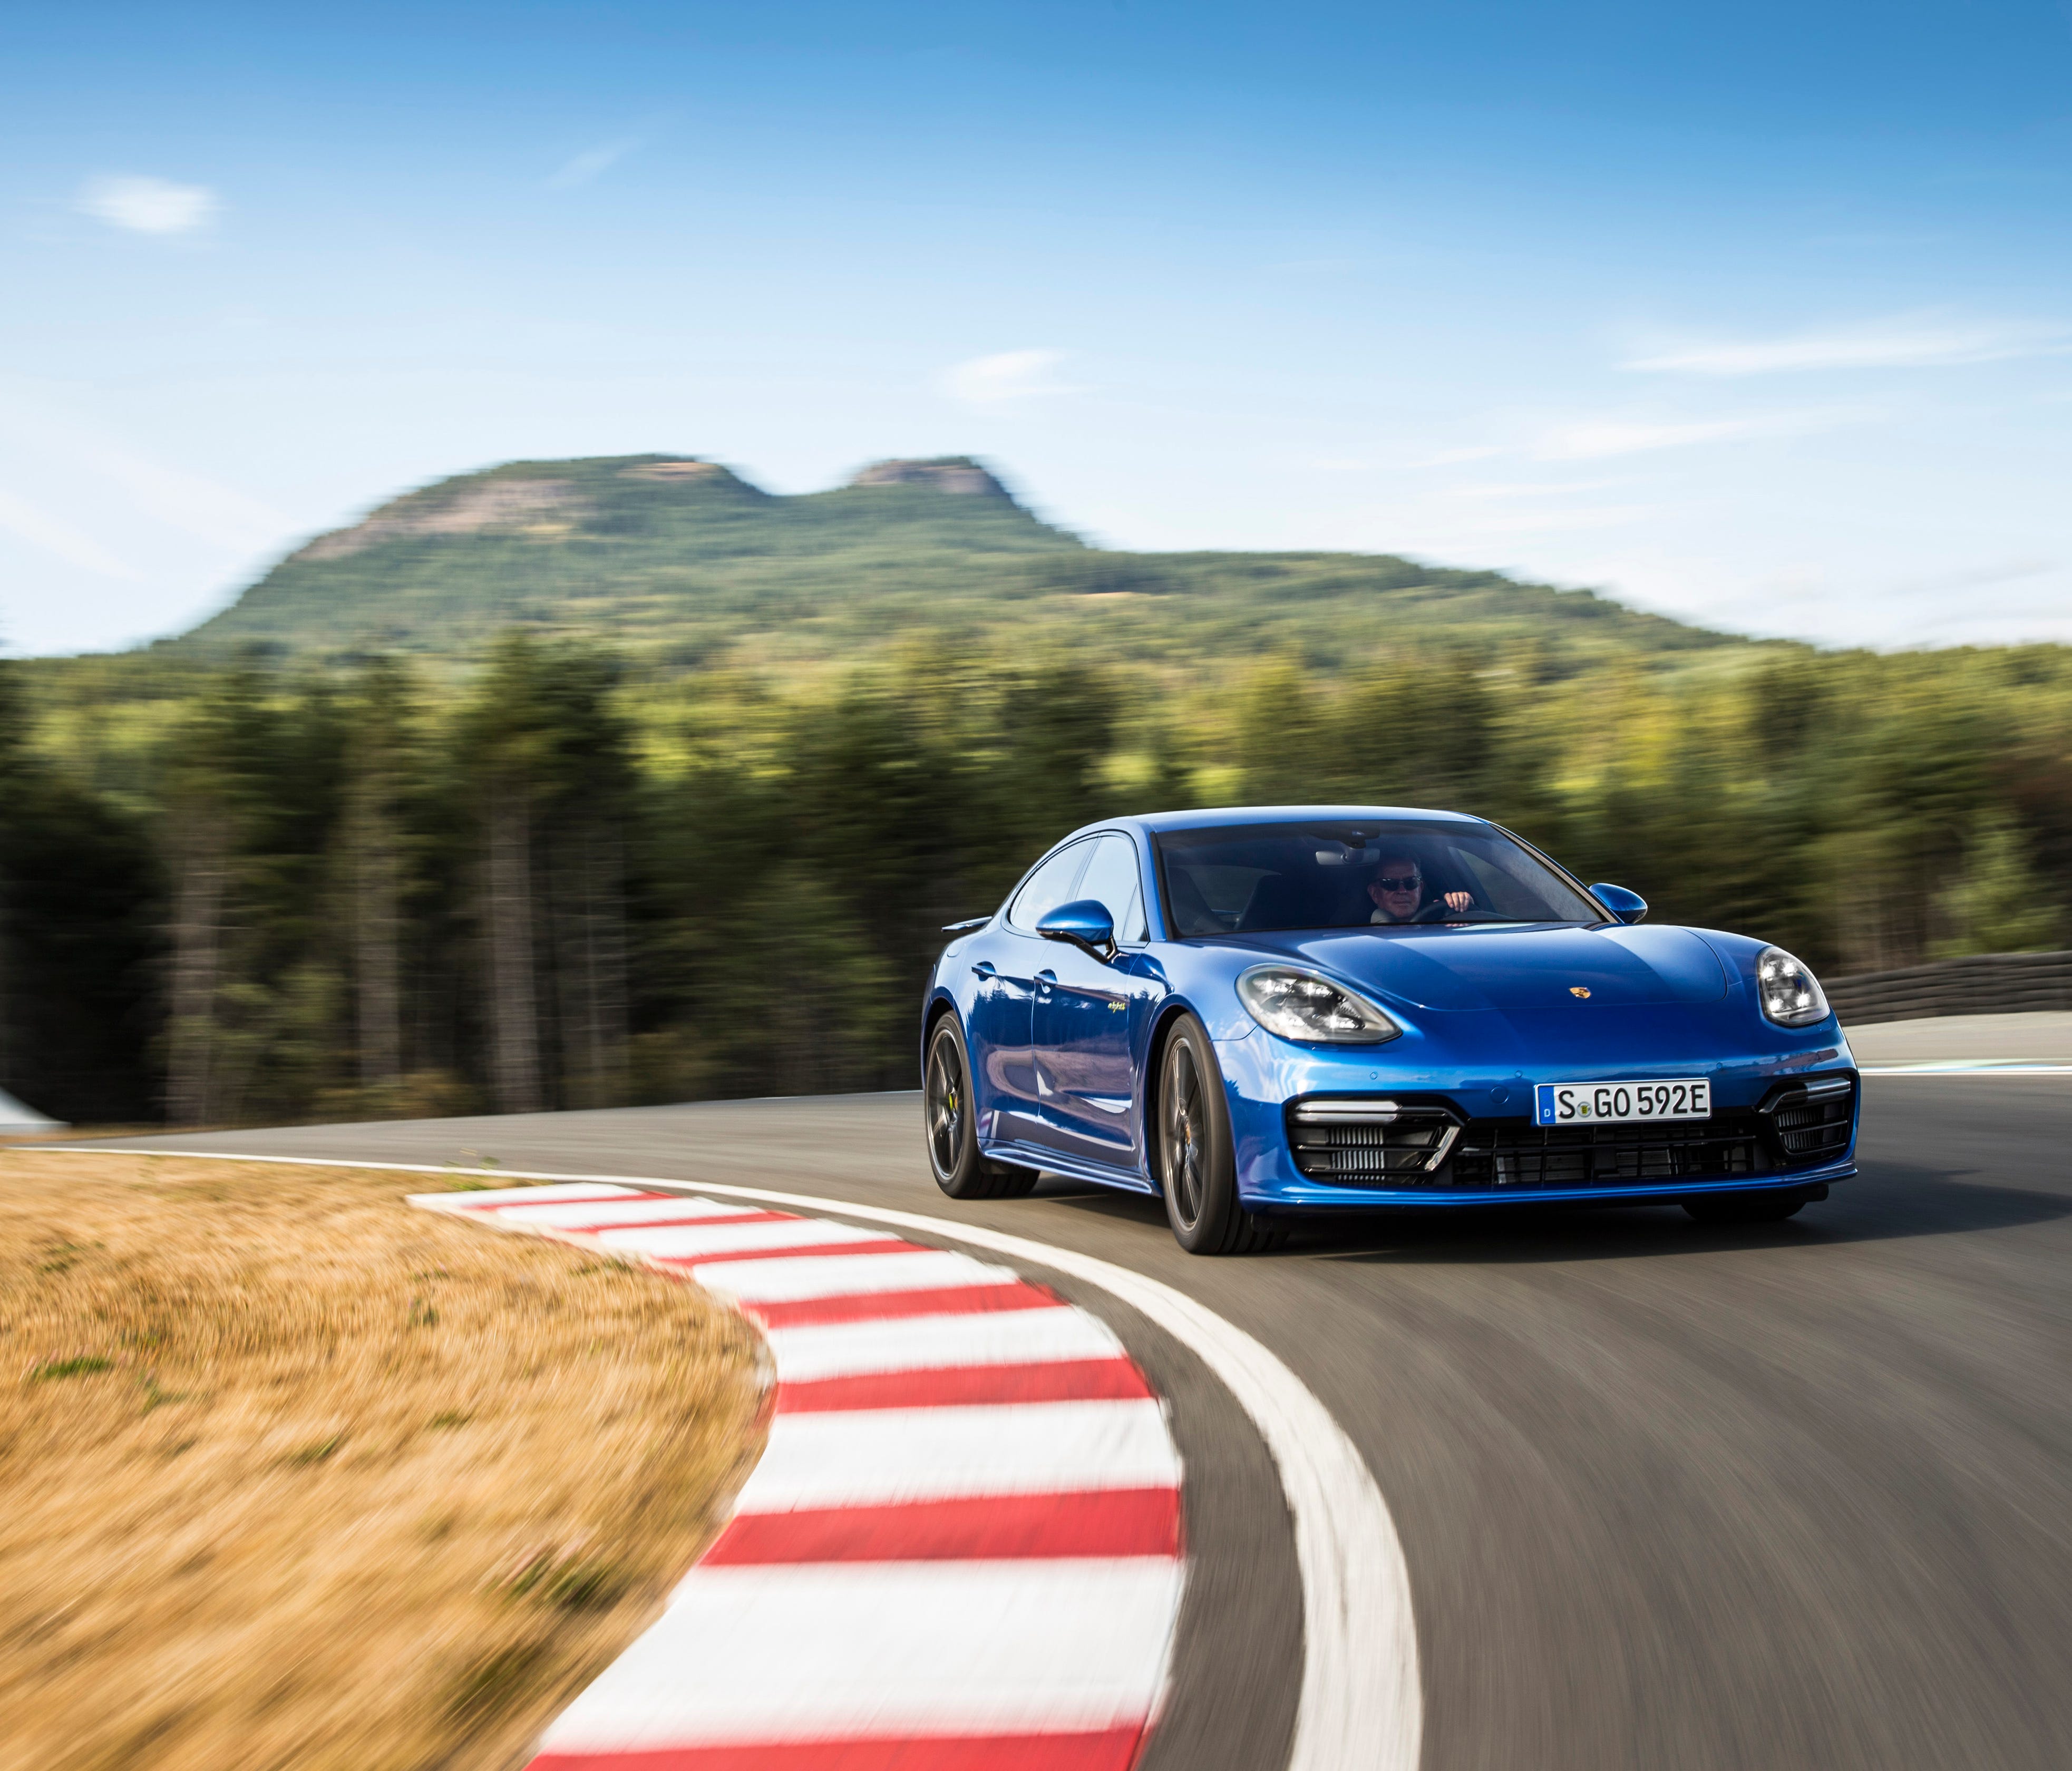 Porsche's Panamera Turbo S E-Hybrid is the top of the sedan food chain for the German automaker, and combines gas and electric power plants for explosive acceleration as well as all-electric cruising, a hint of things to come with the Mission E elect